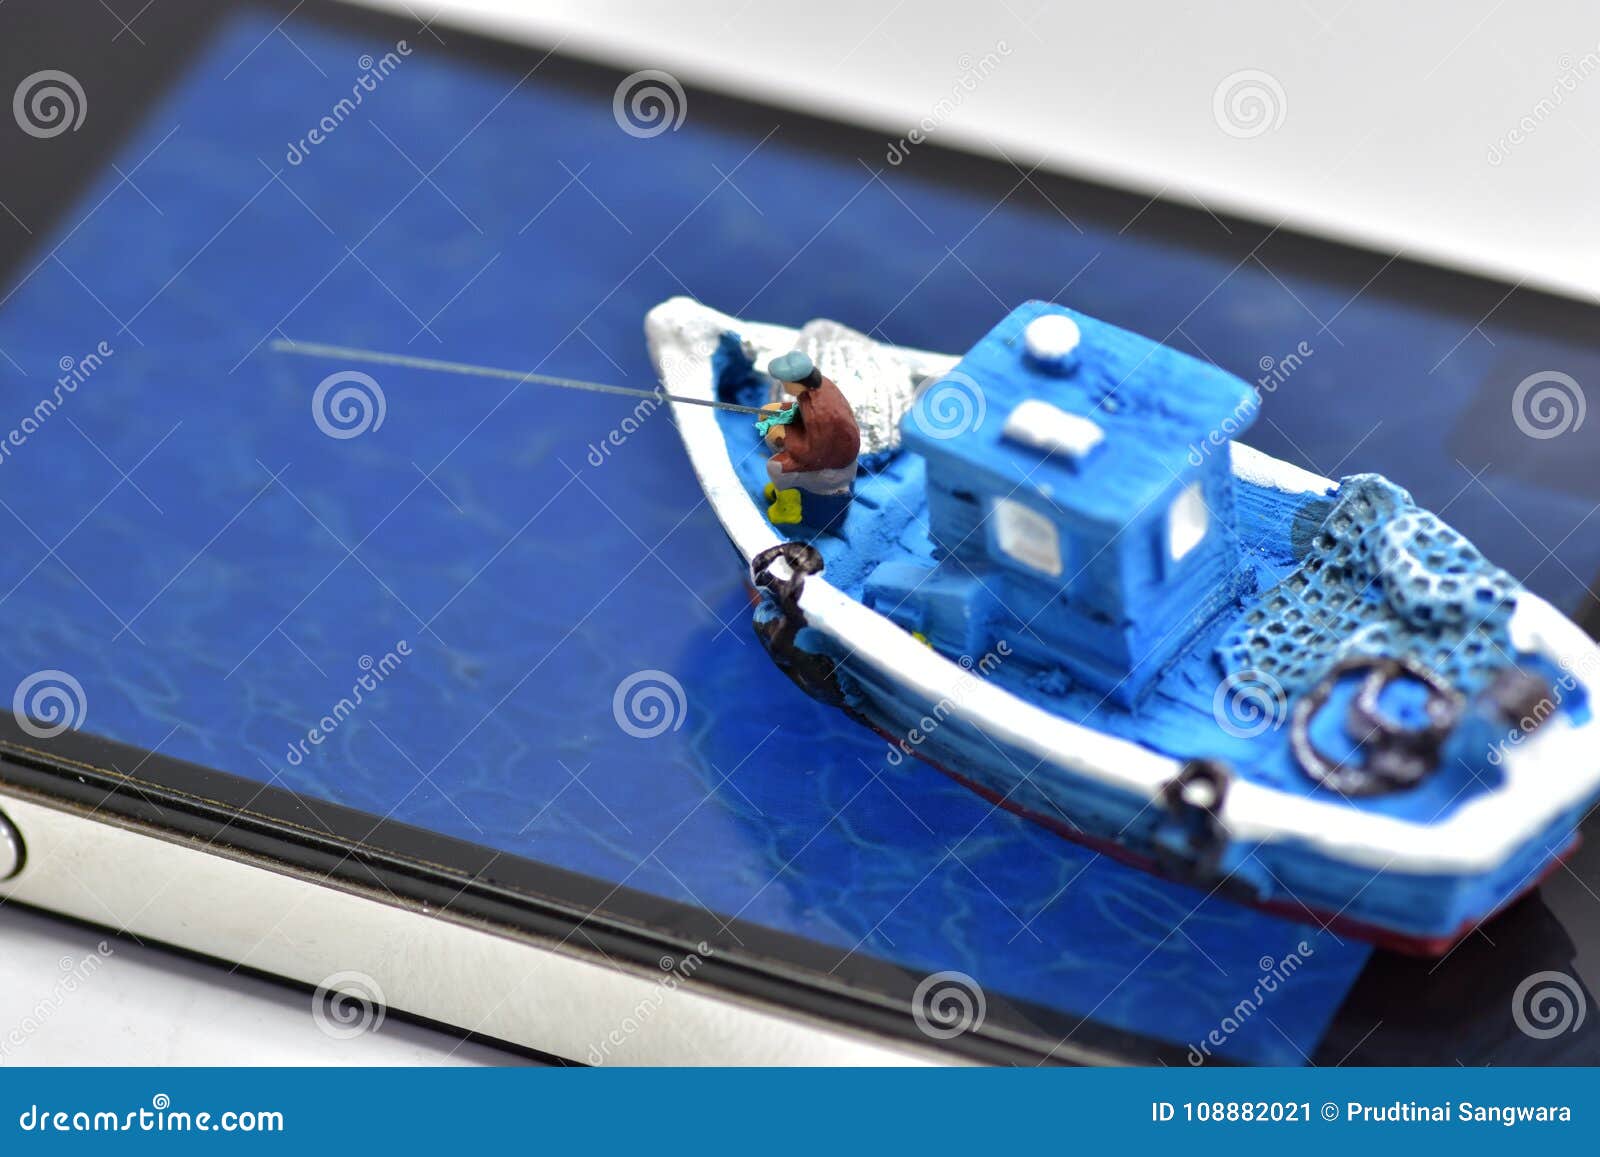 Toy Boat with Fishermen on Smartphone Stock Image - Image of